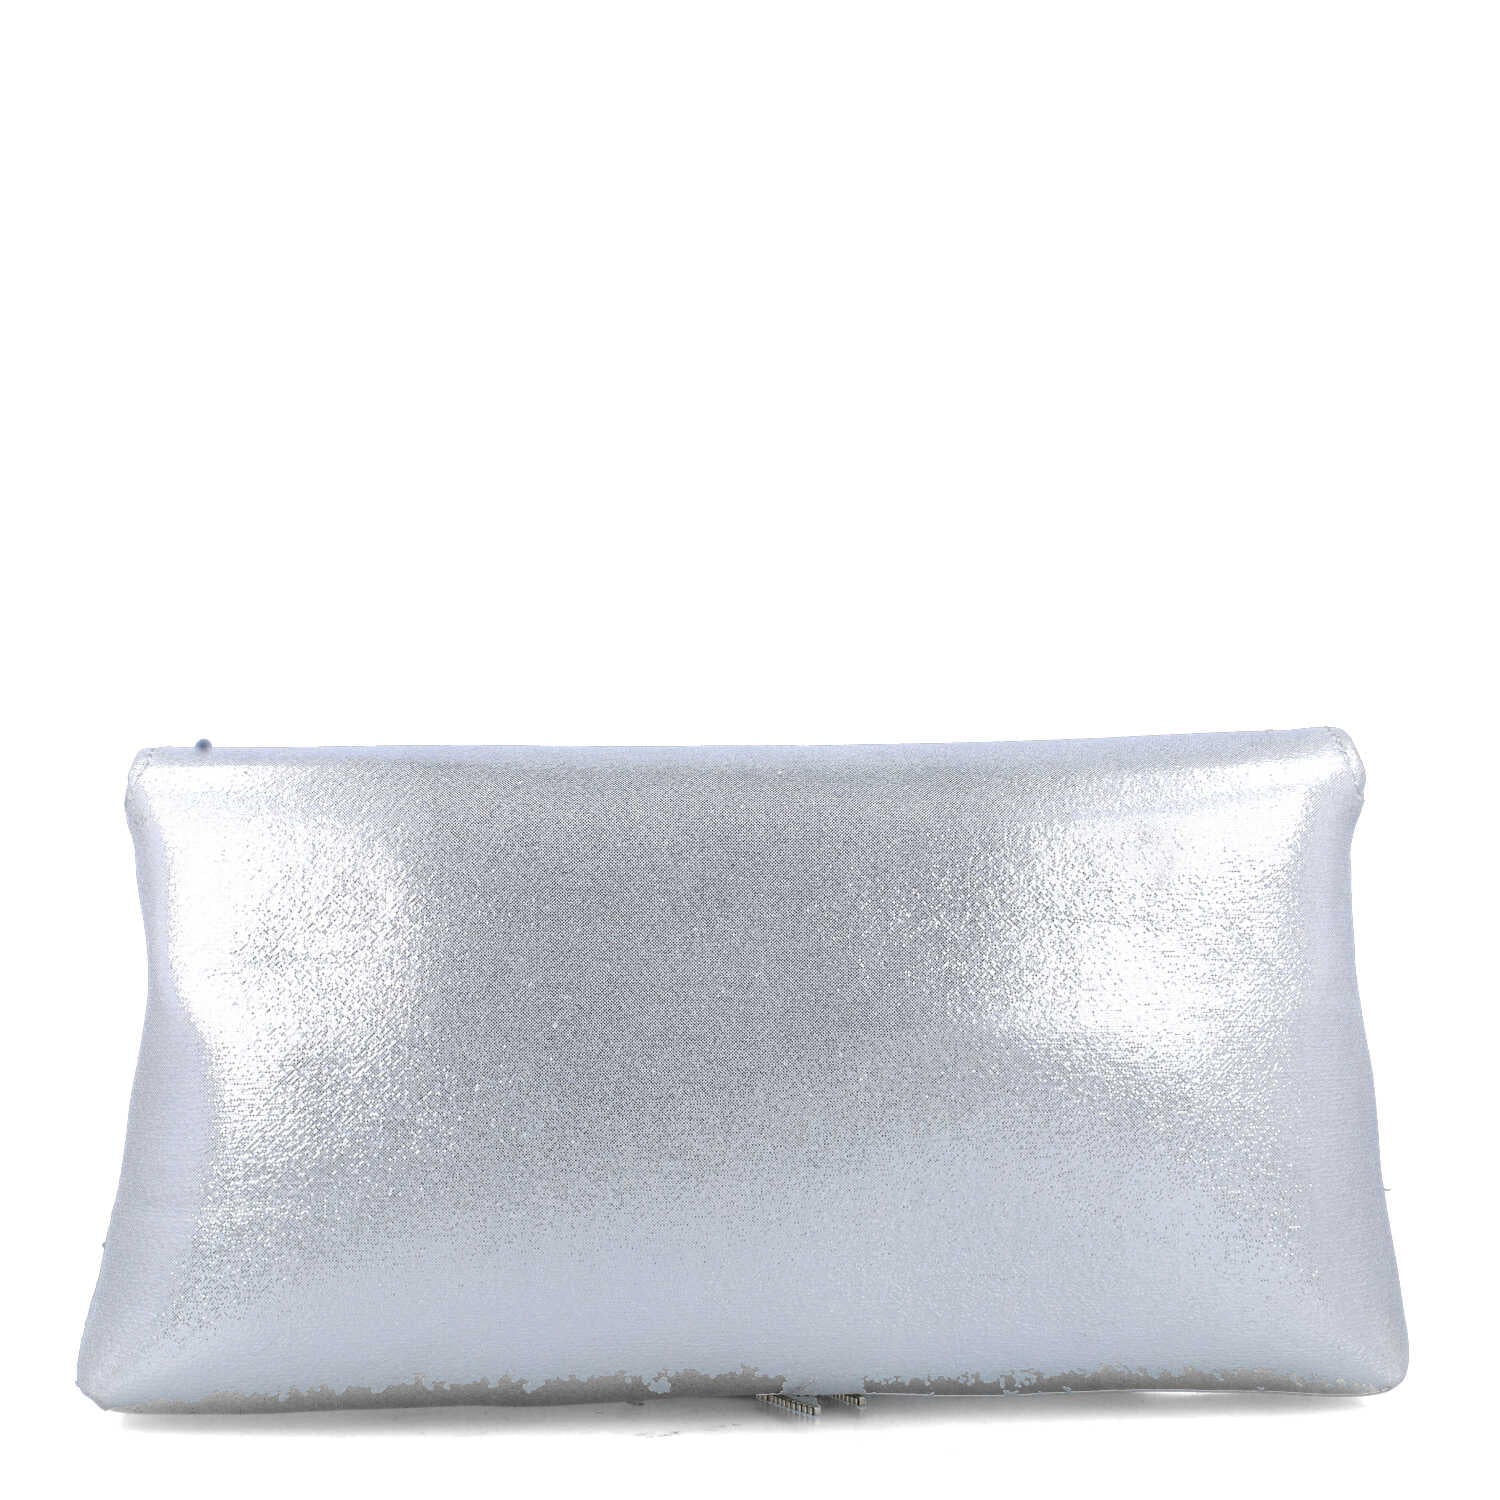 Silver Embellished Clutch With Shimmer_85698_09_03